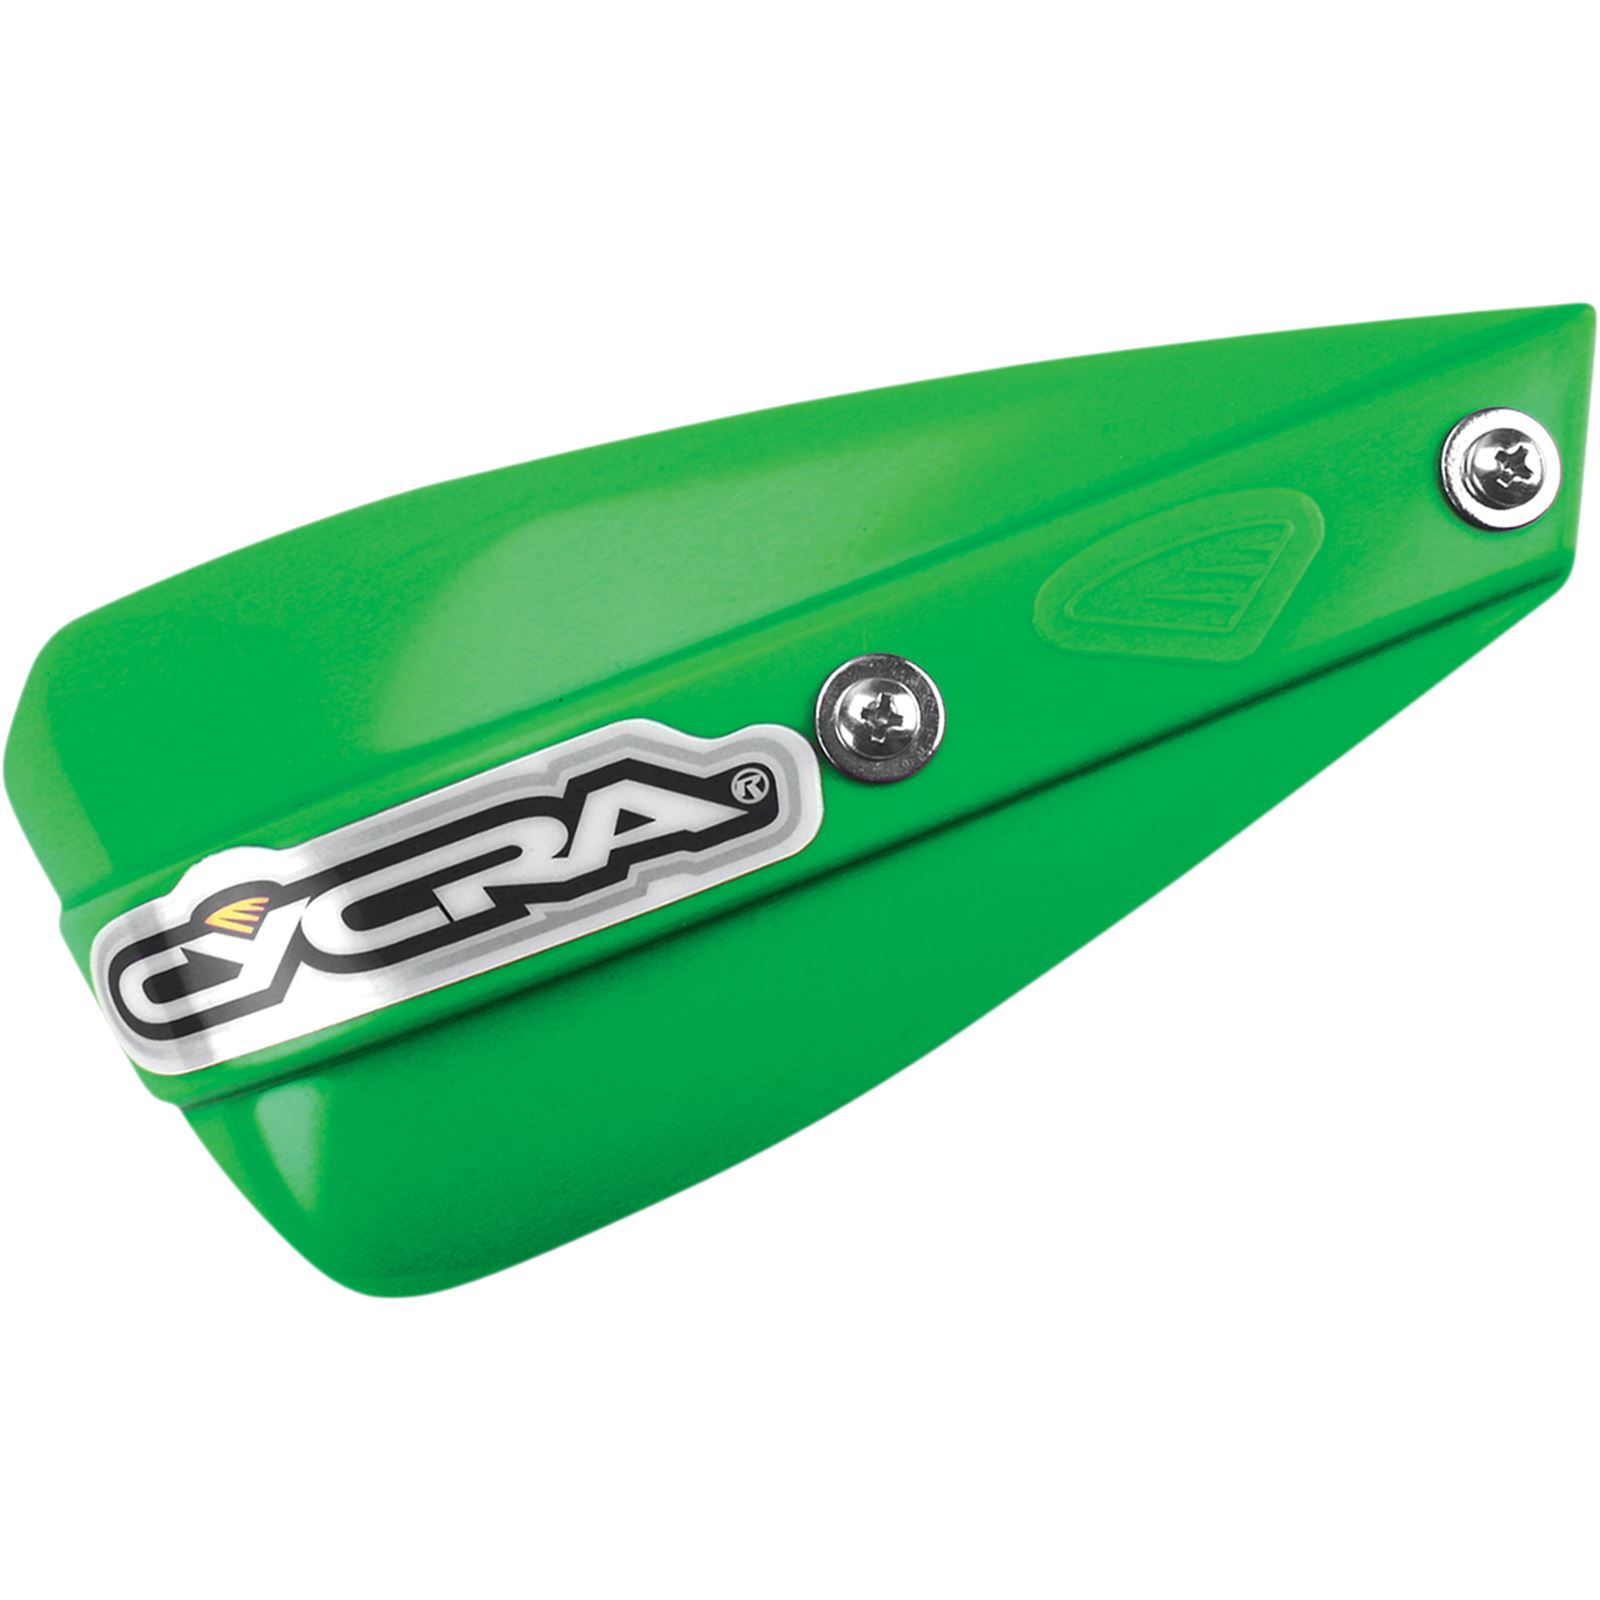 Cycra Green Low-Profile Replacement Handshields